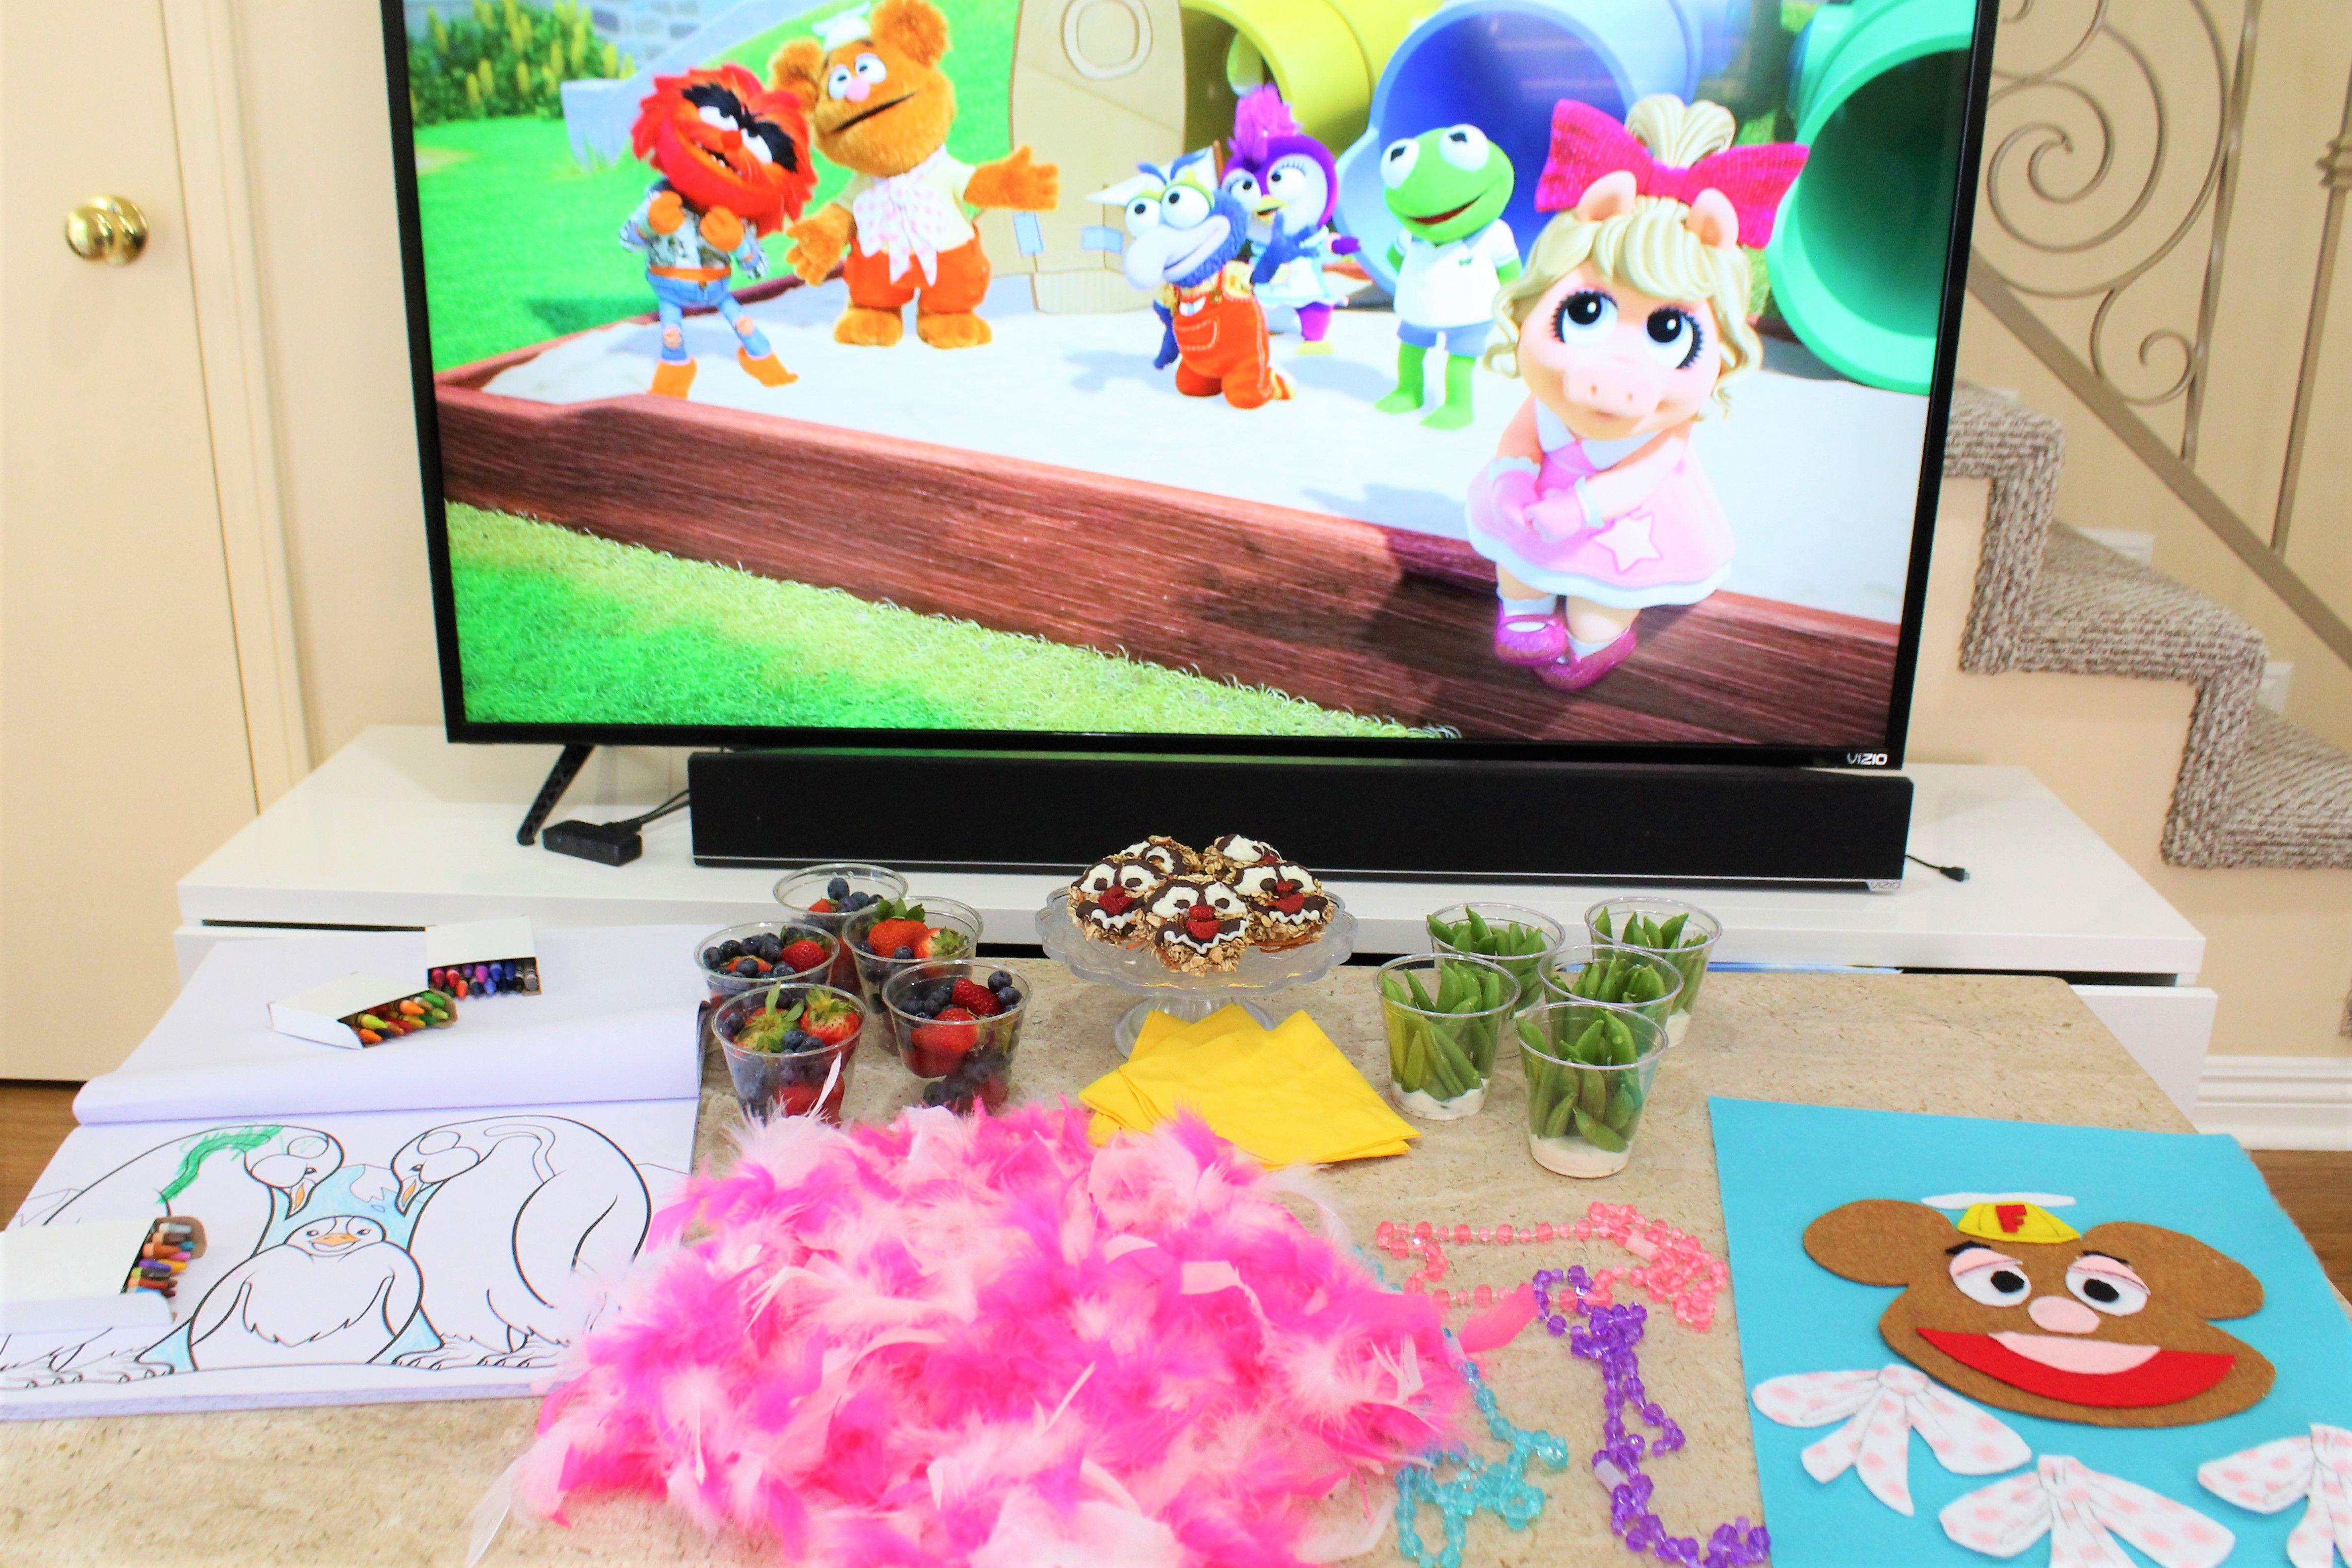 Disney Junior Muppet Babies Logo - Disney Junior Muppet Babies Viewing Party! Yaaaayy! - The Healthy Mouse